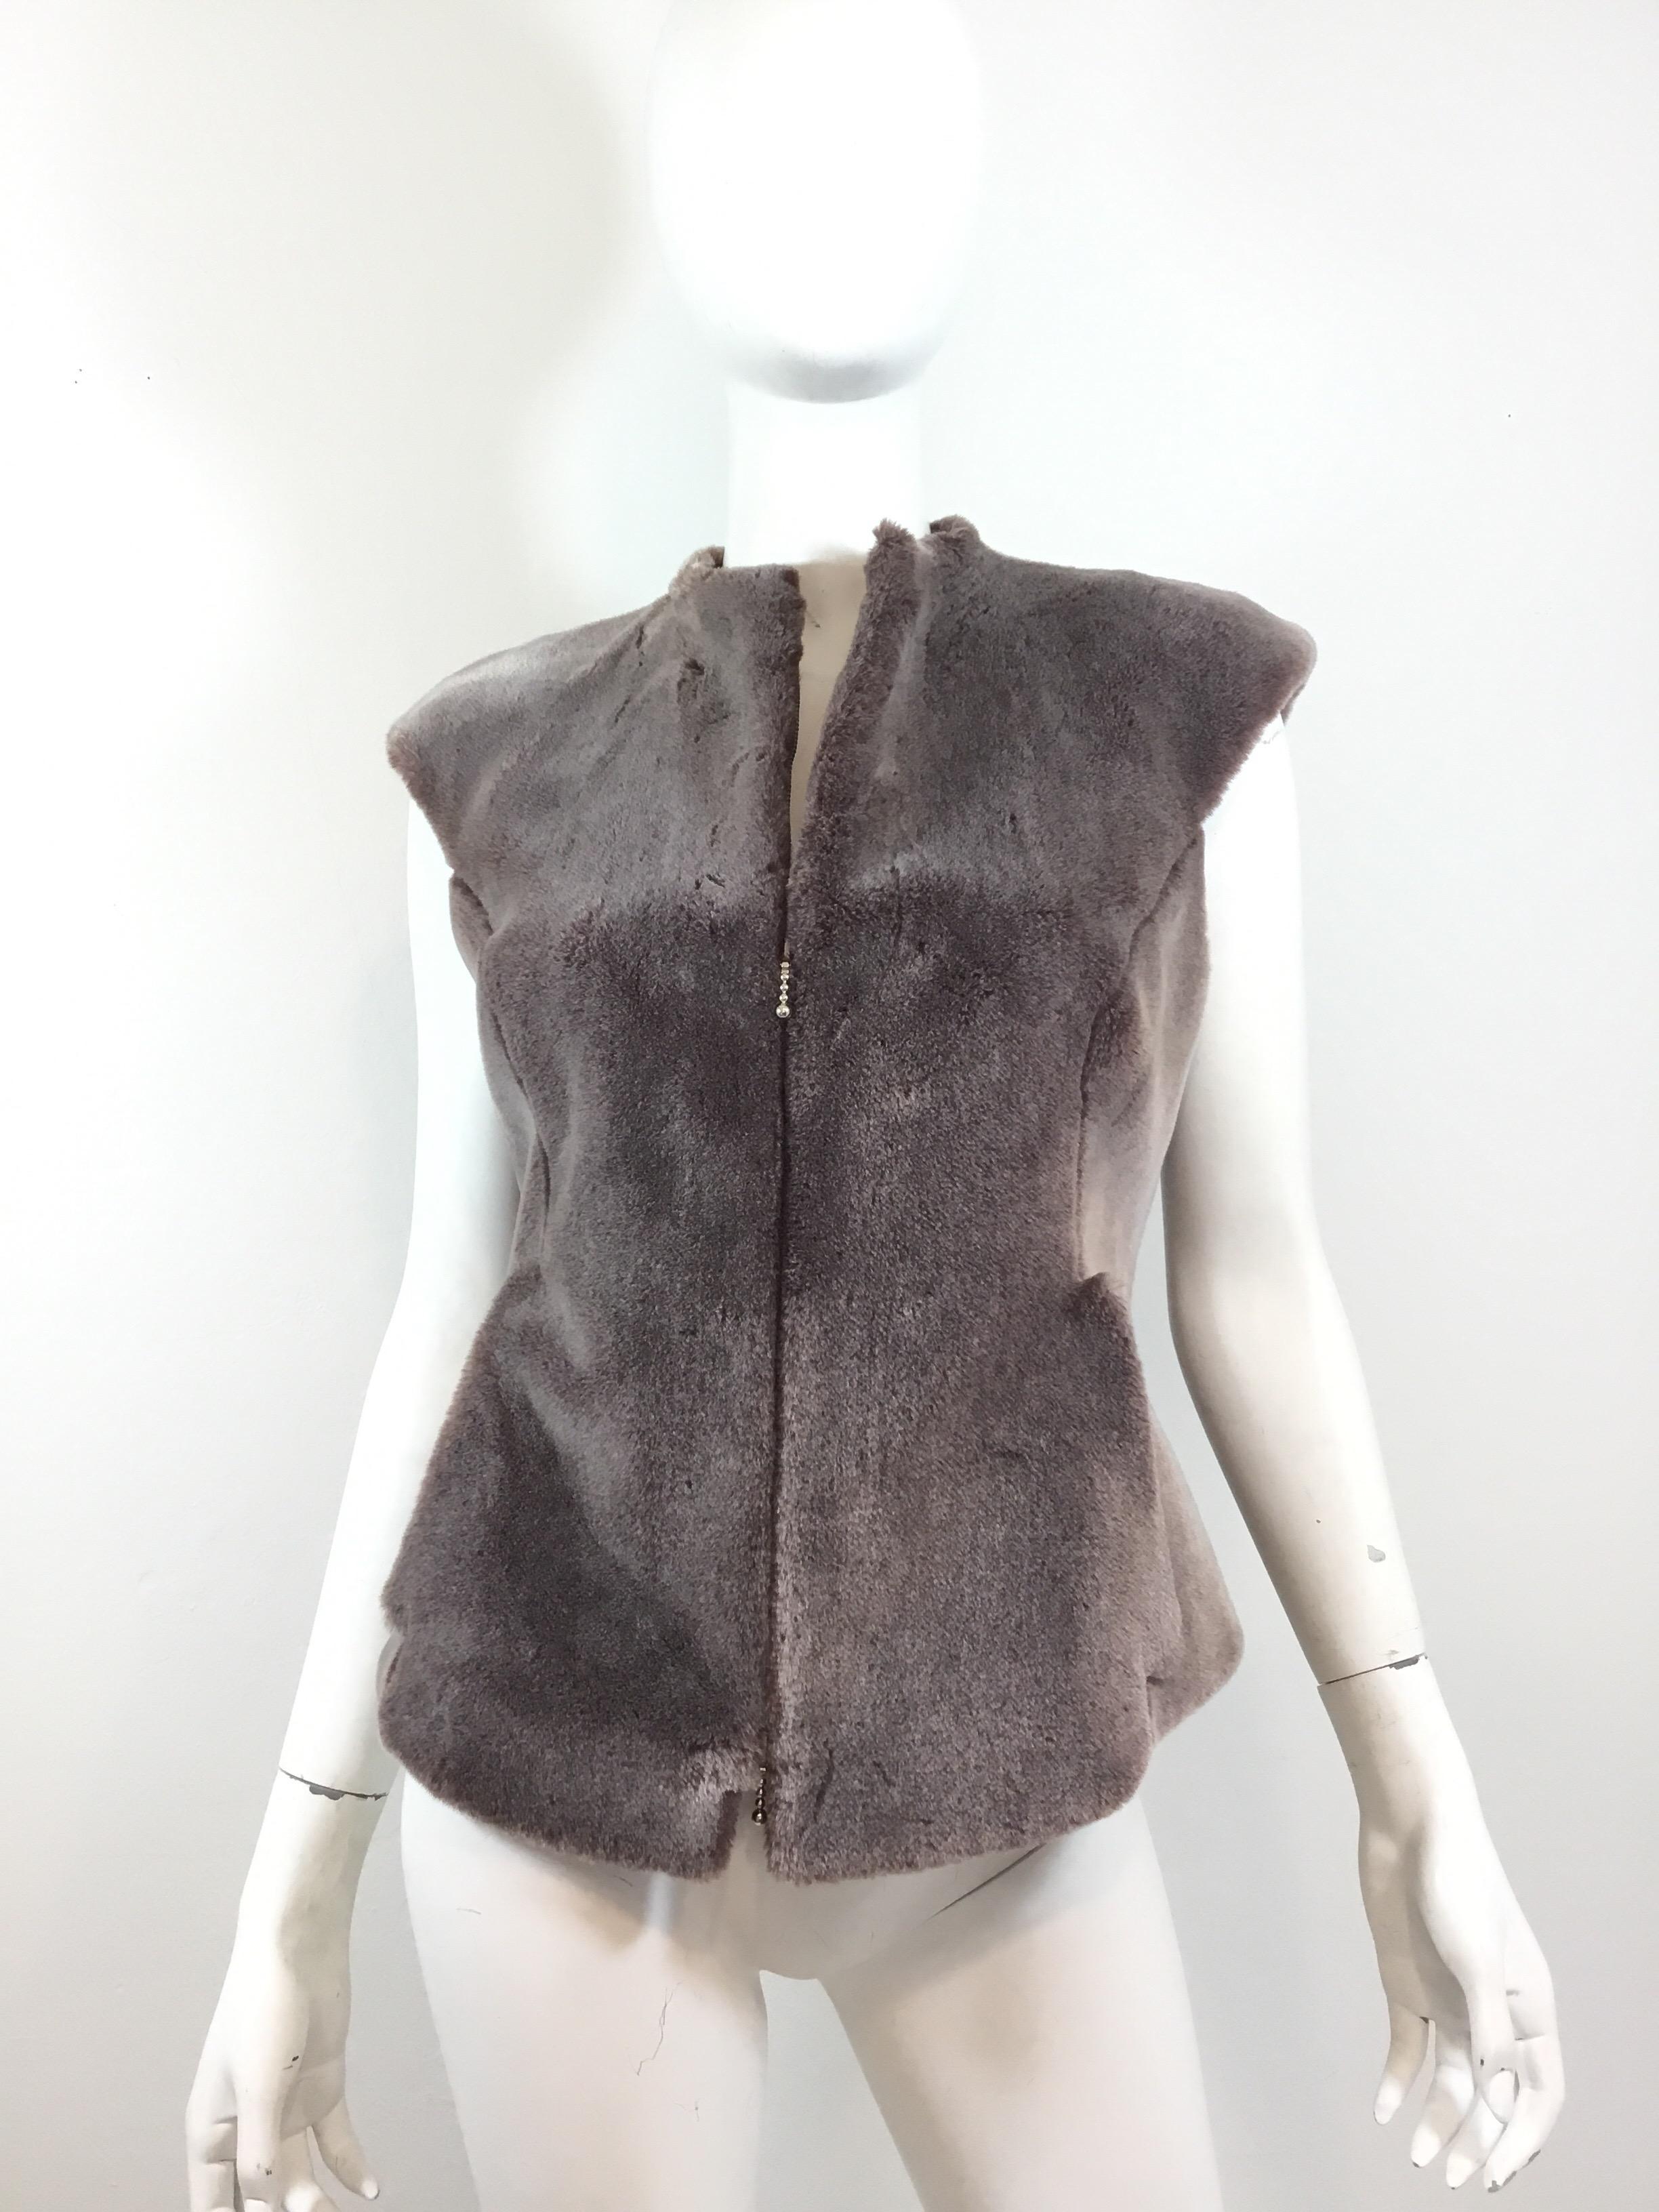 Chloé faux fur vest featured in a mauve-Grey color with a zippered fastening. Vest is fully lined and is a size 40. Composed of 73% acrylic and 27% cotton. Pockets at the waist have a leather trim lining. Made in France.

Bust 34”, length 25”